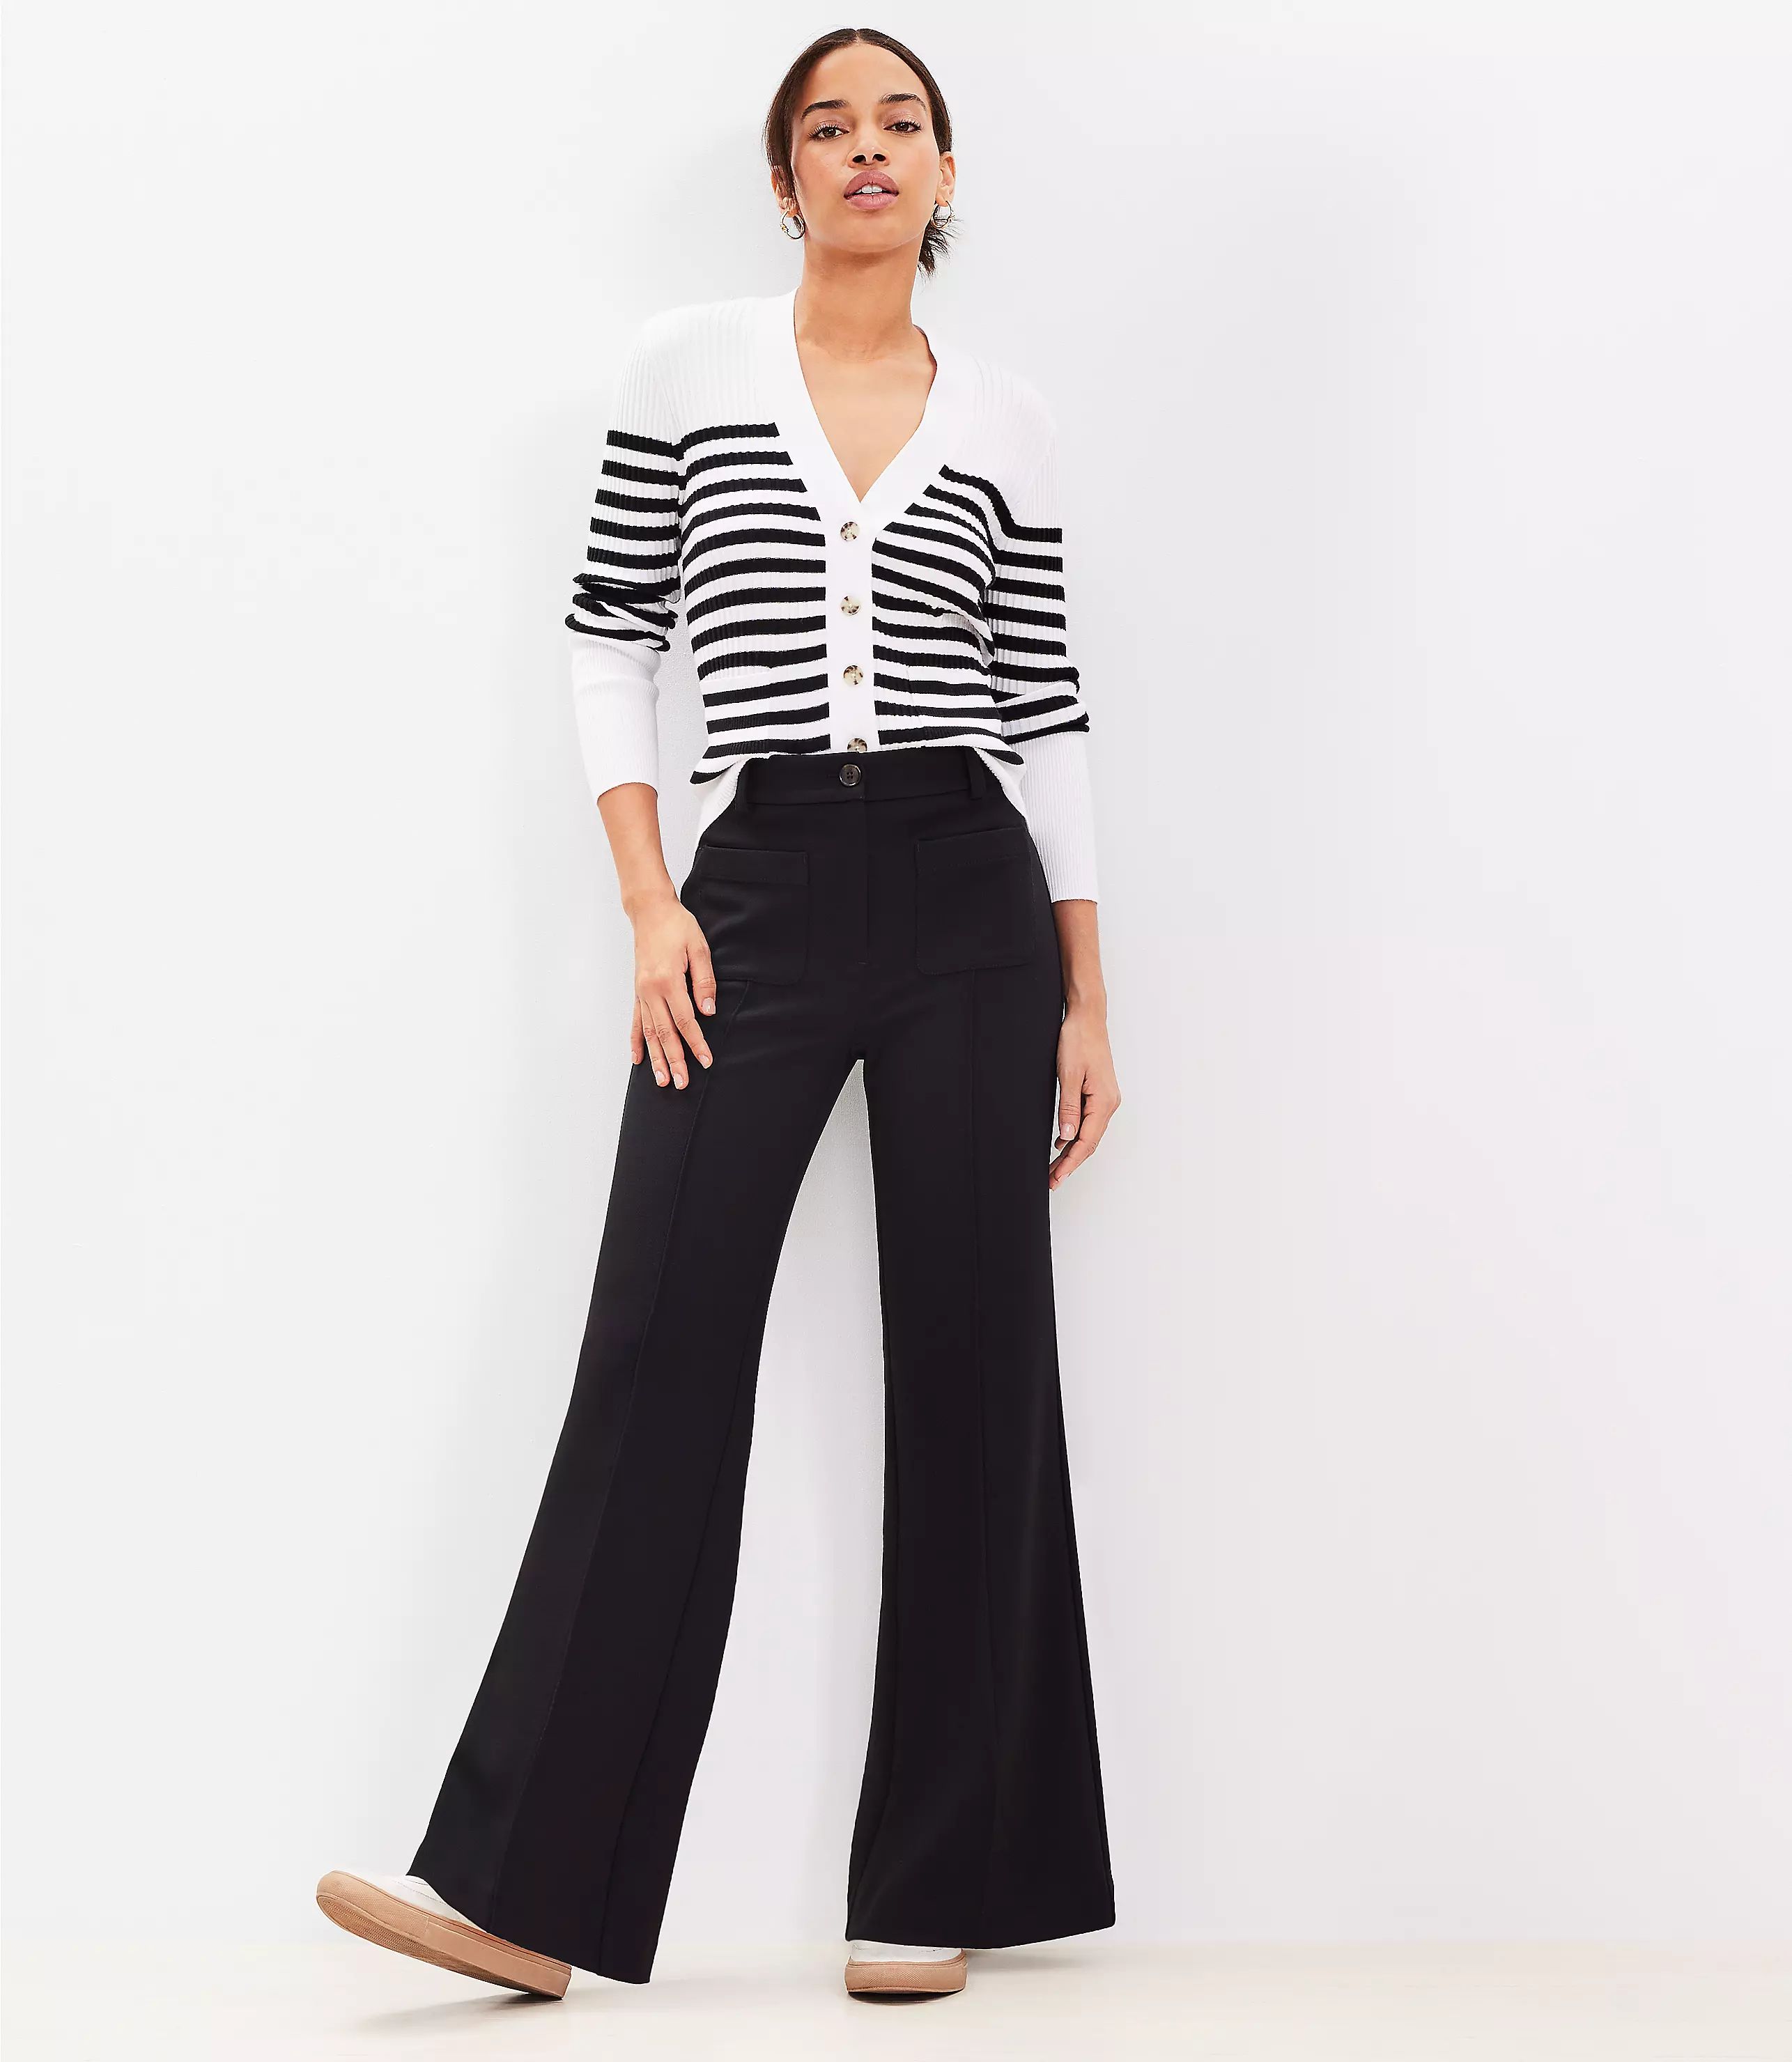 Pintucked Patch Pocket Flare Pants in Doubleface | LOFT